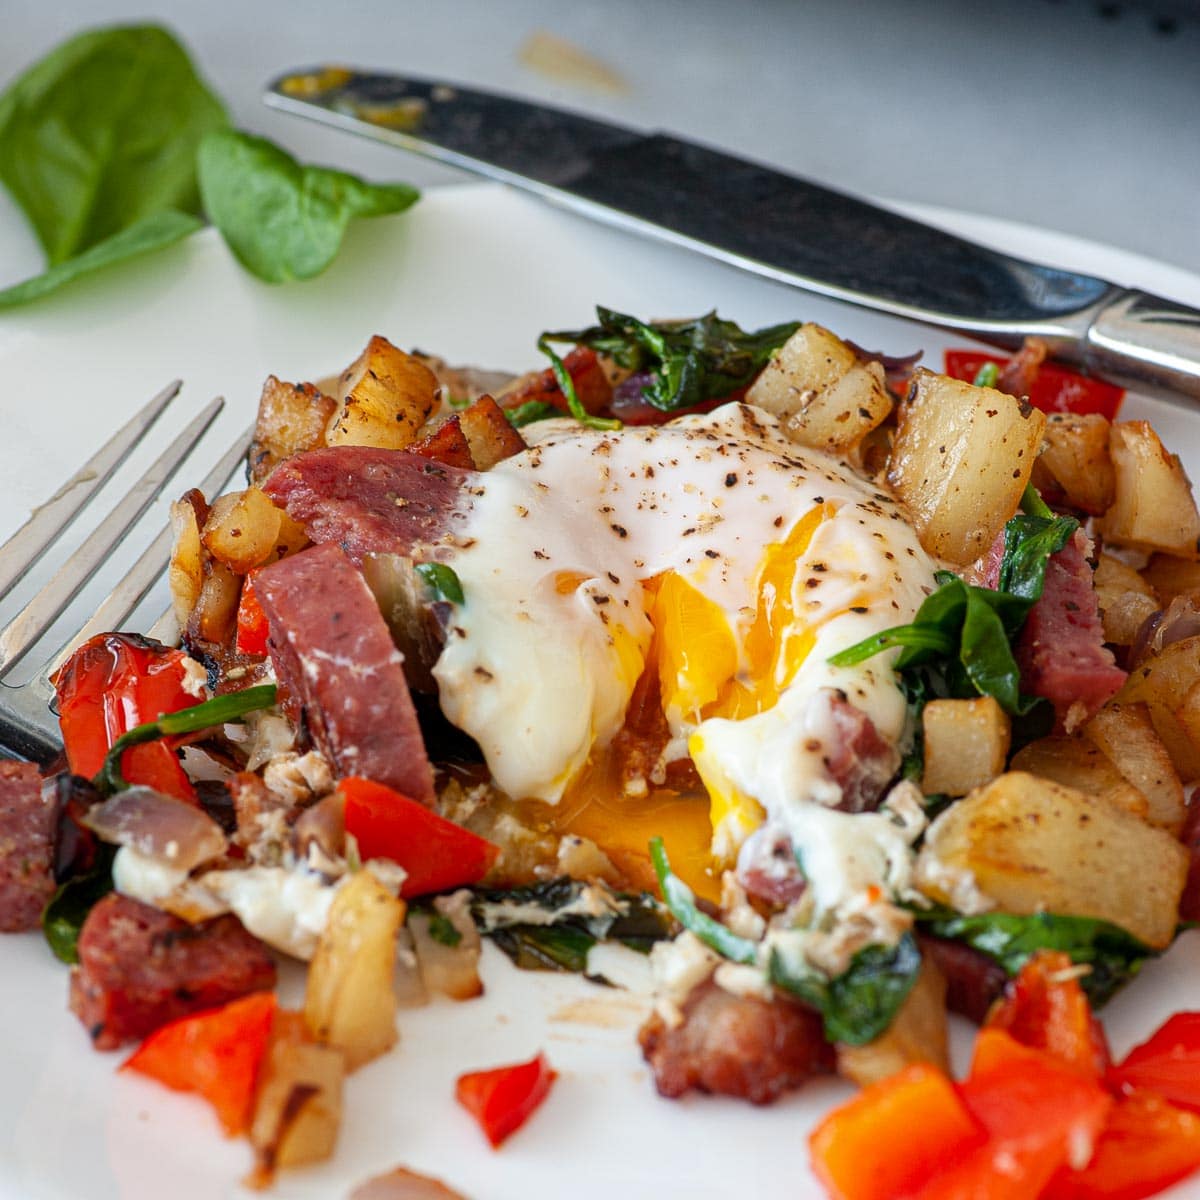 Breakfast hash with fried egg